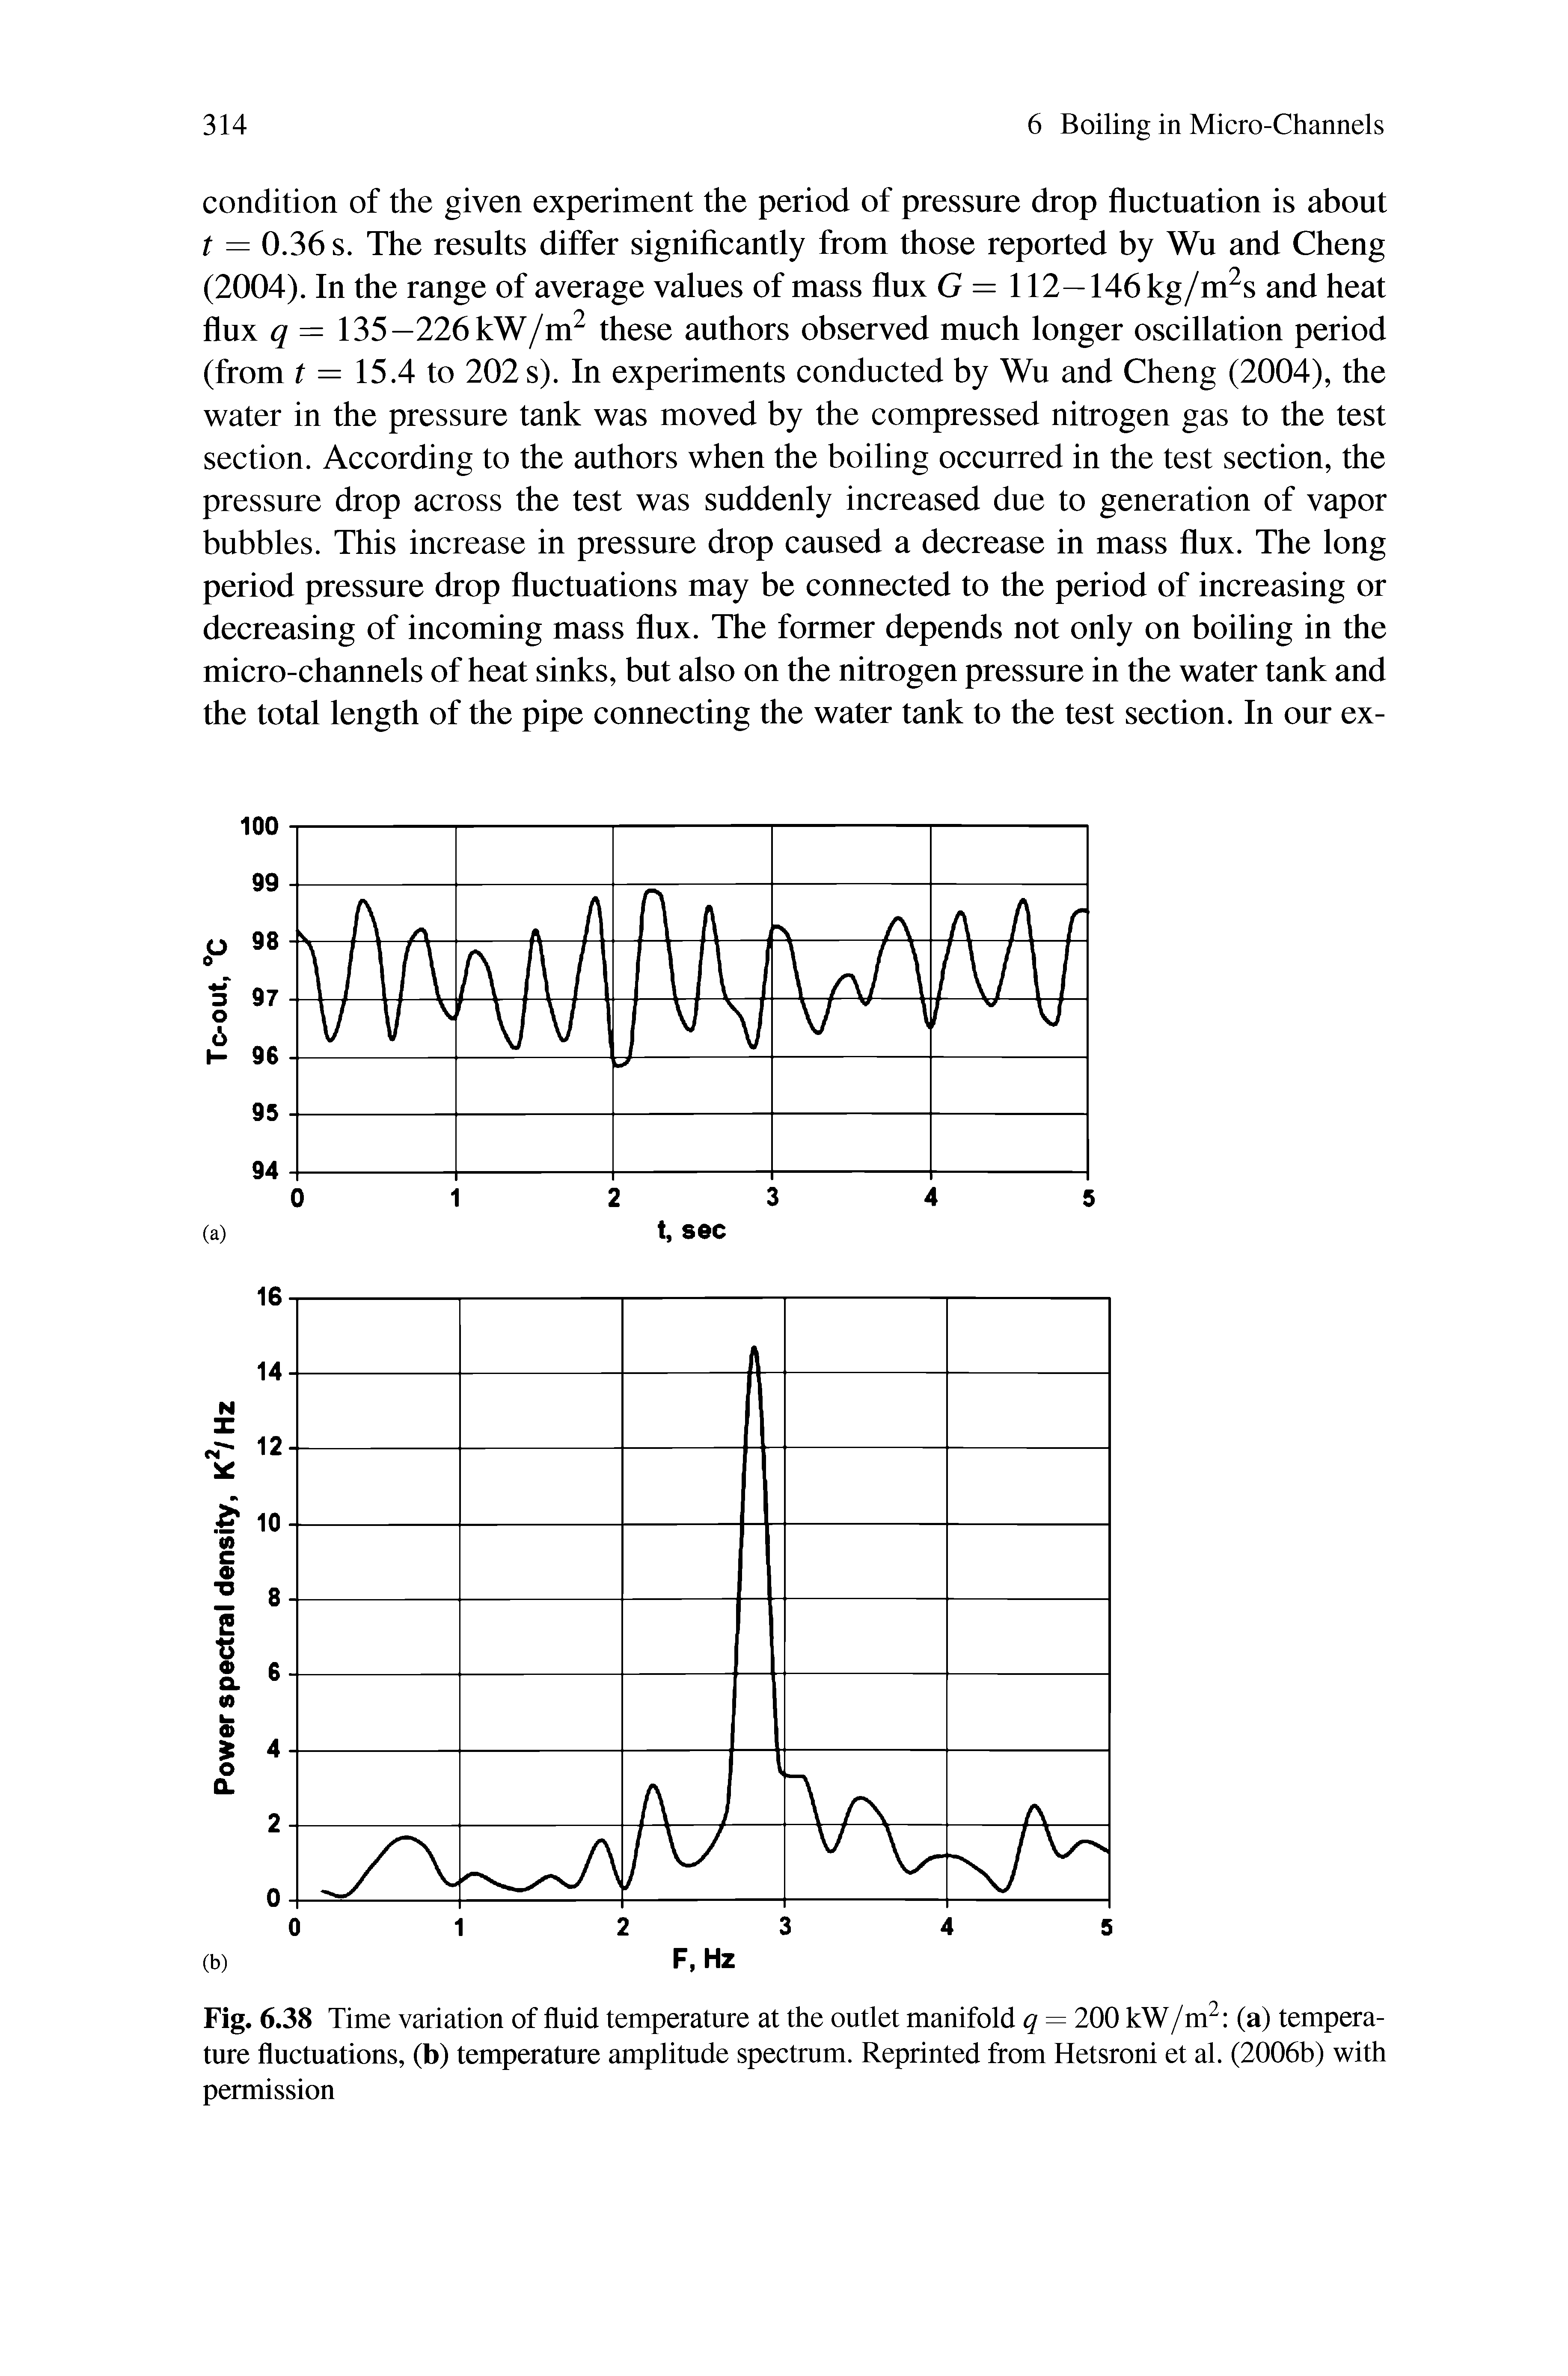 Fig. 6.38 Time variation of fluid temperature at the outlet manifold q = 200 kW/m (a) temperature fluctuations, (b) temperature amplitude spectrum. Reprinted from Hetsroni et al. (2006b) with permission...